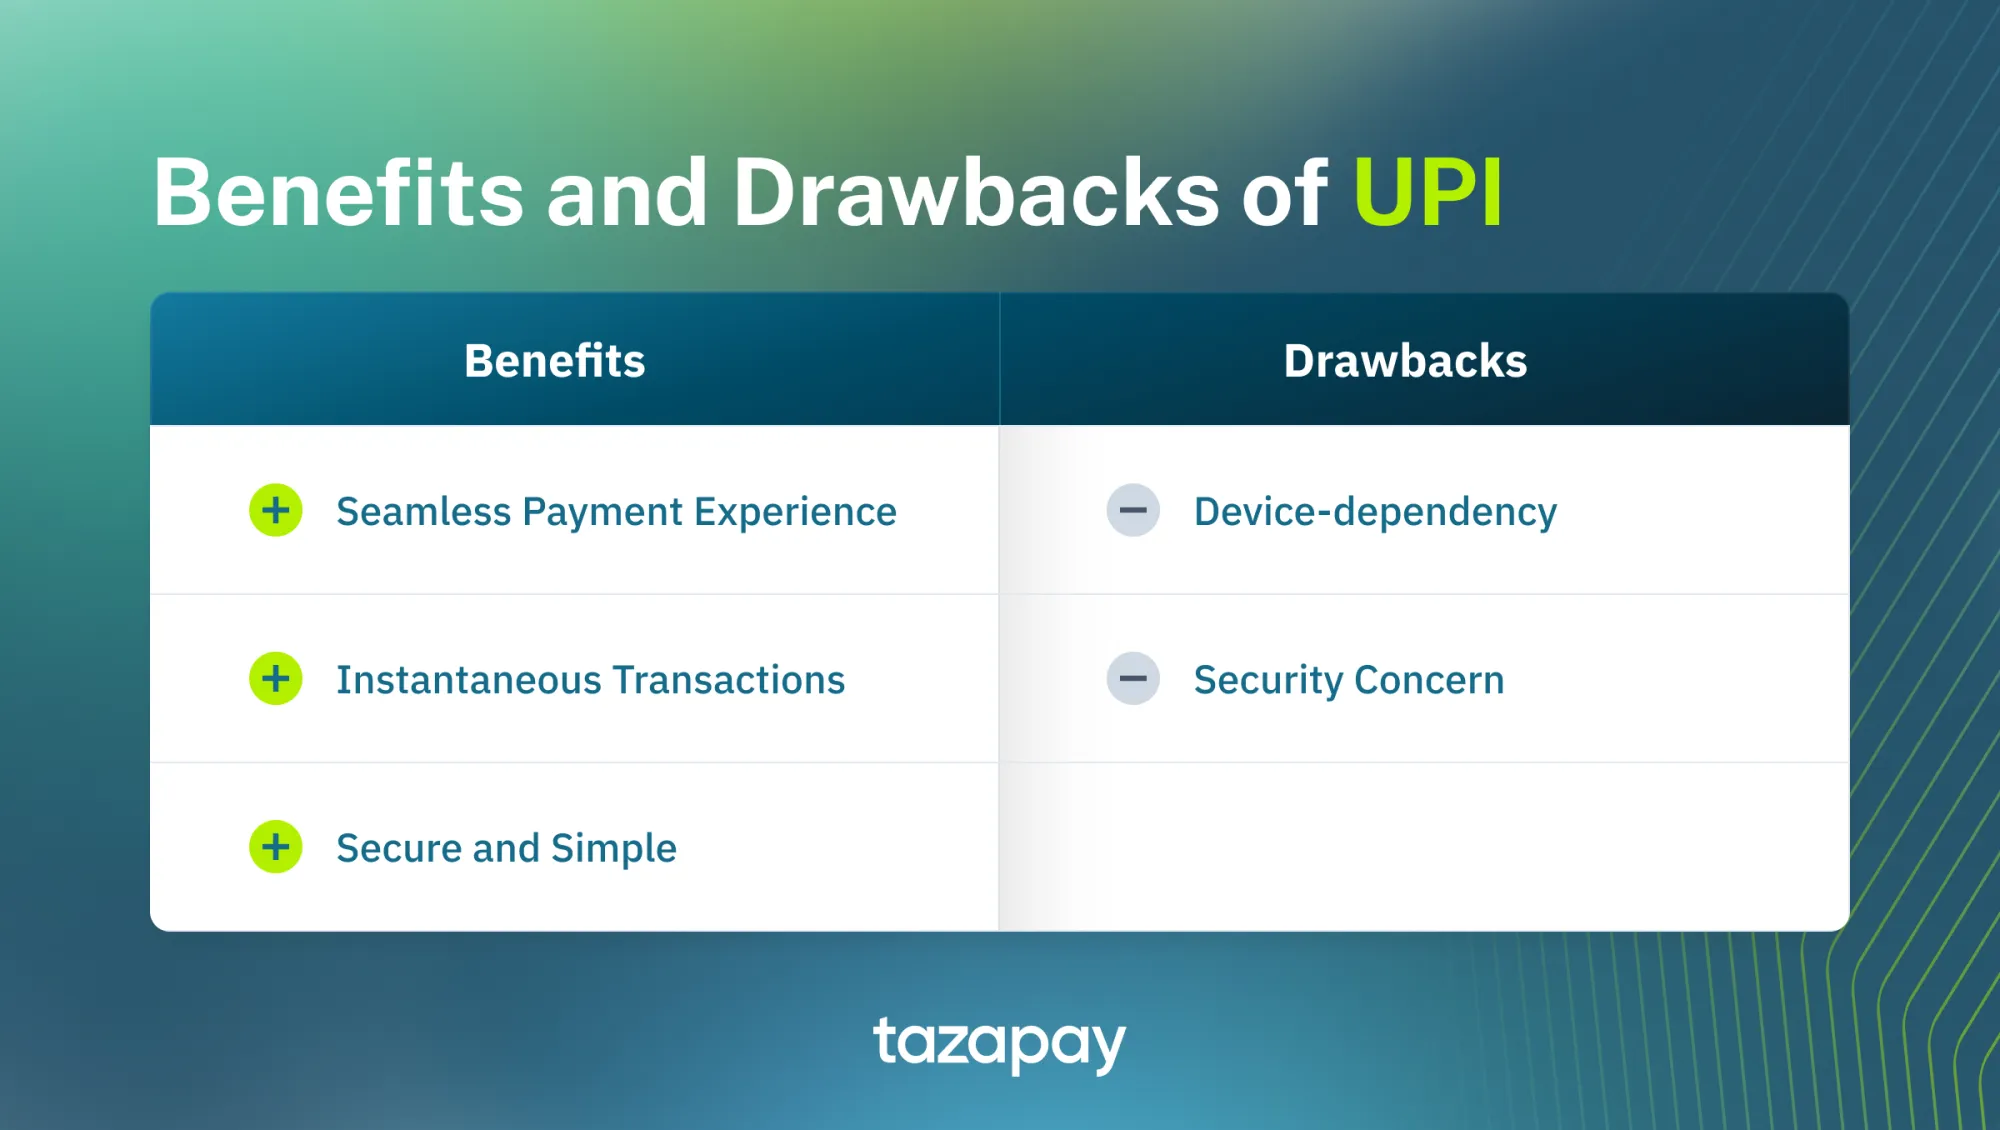 benefits and drawbacks of UPI for online payment gateways